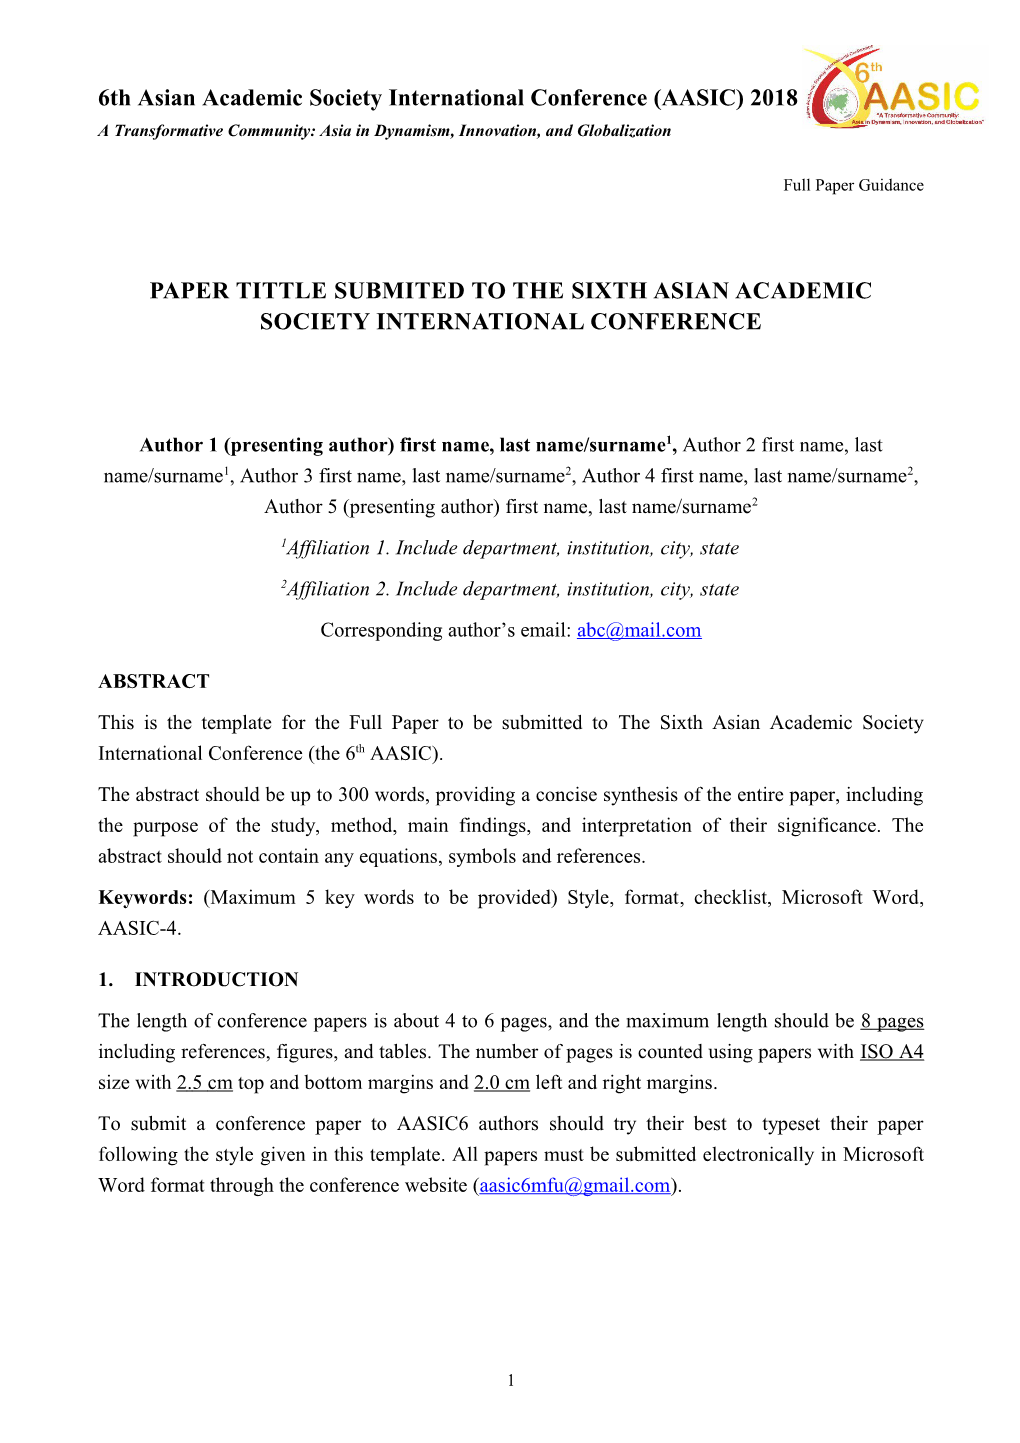 4Th AASIC Full Paper Template